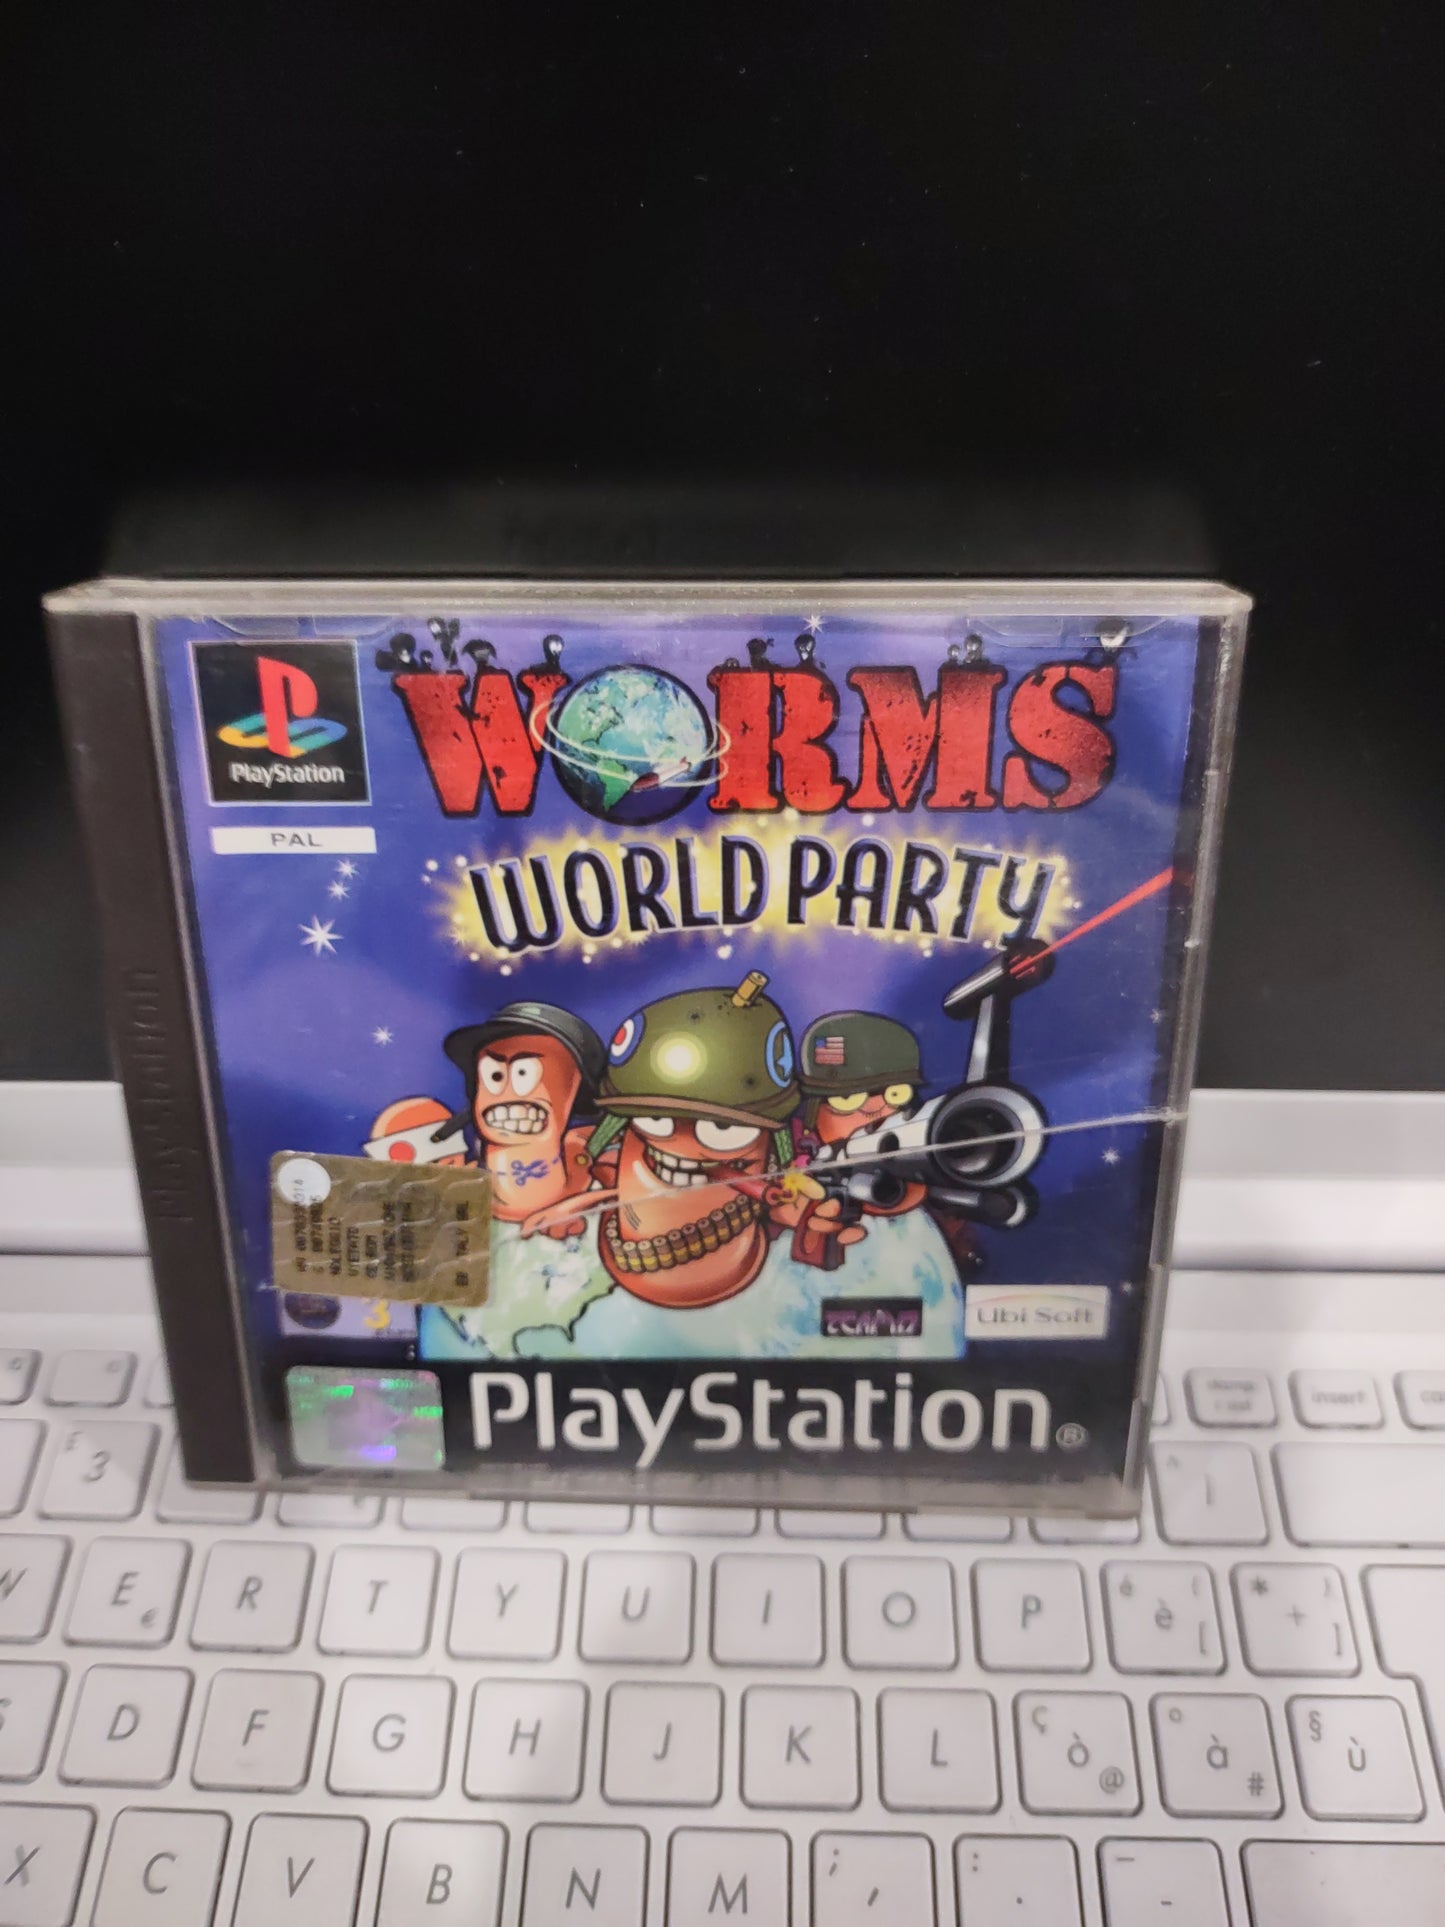 Gioco ps1 PlayStation Worms world party pal